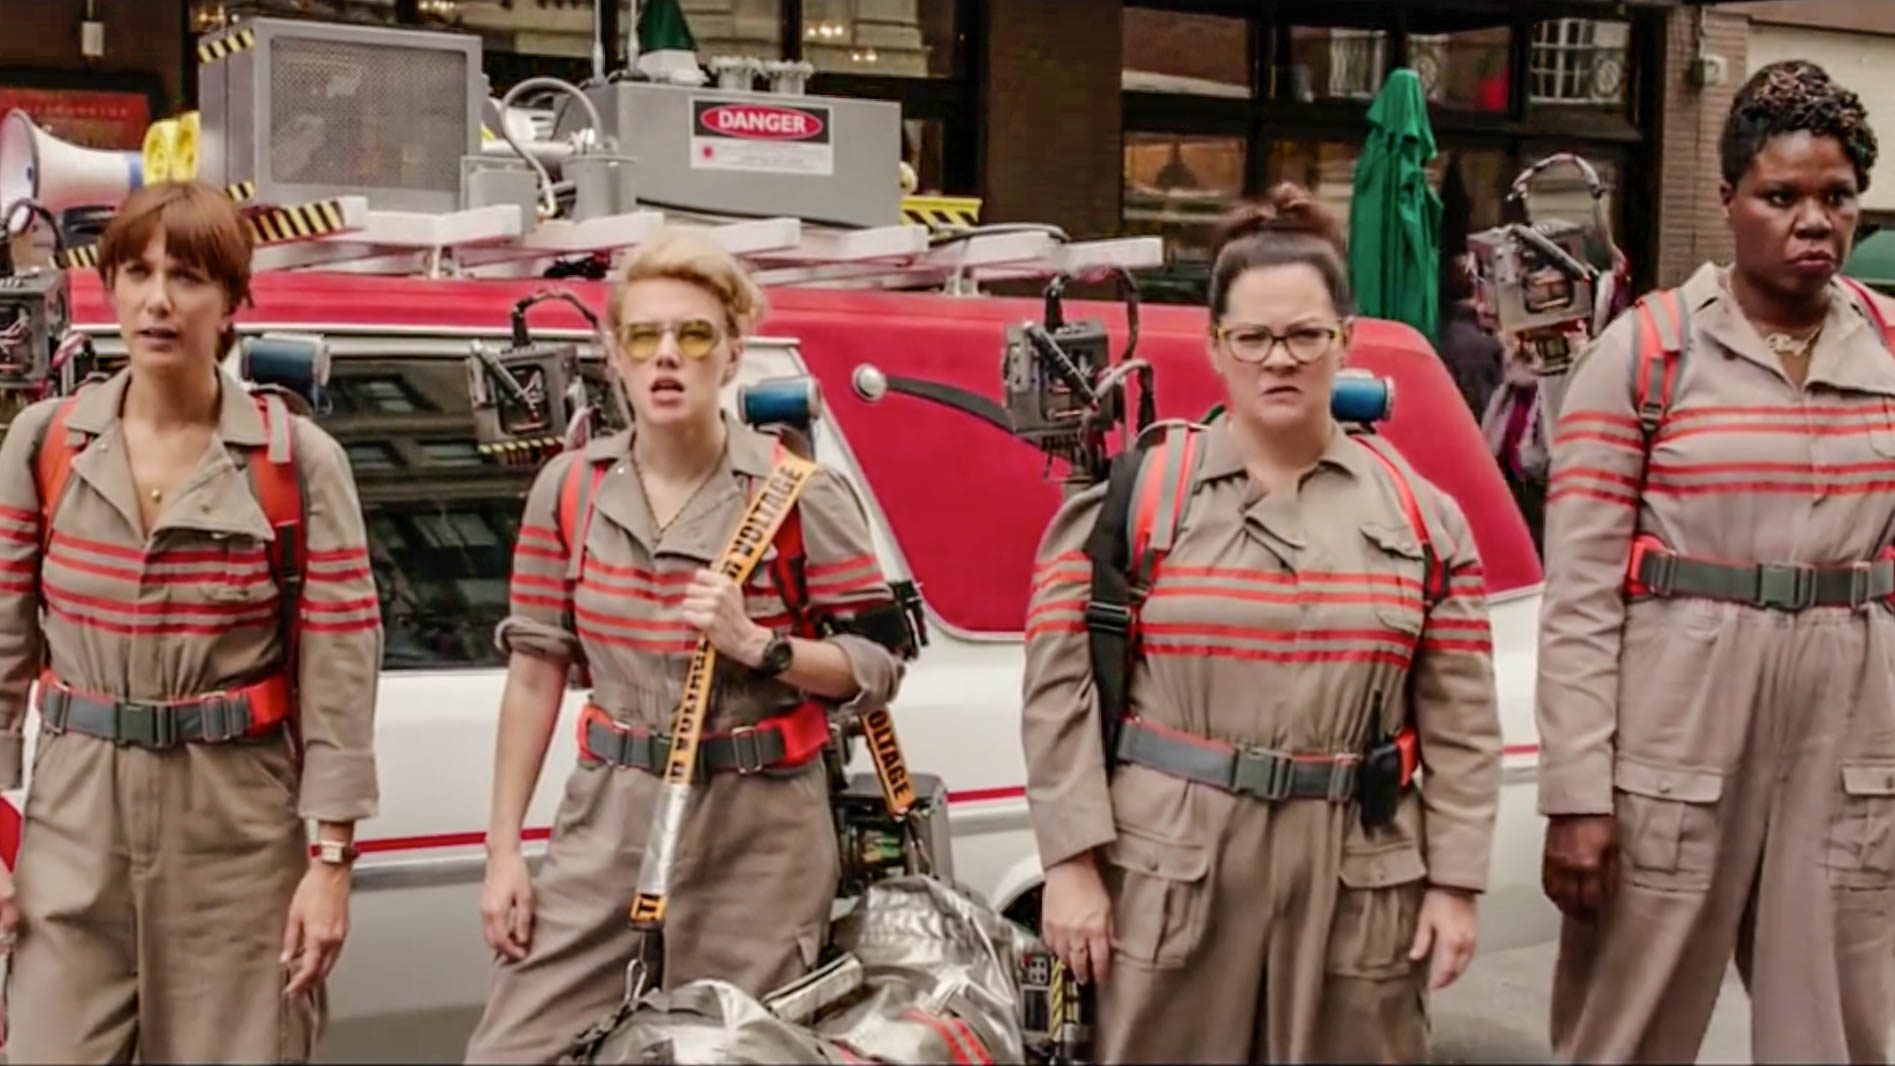 WATCH: 8 Things to know about the all-female ‘Ghostbusters’ reboot